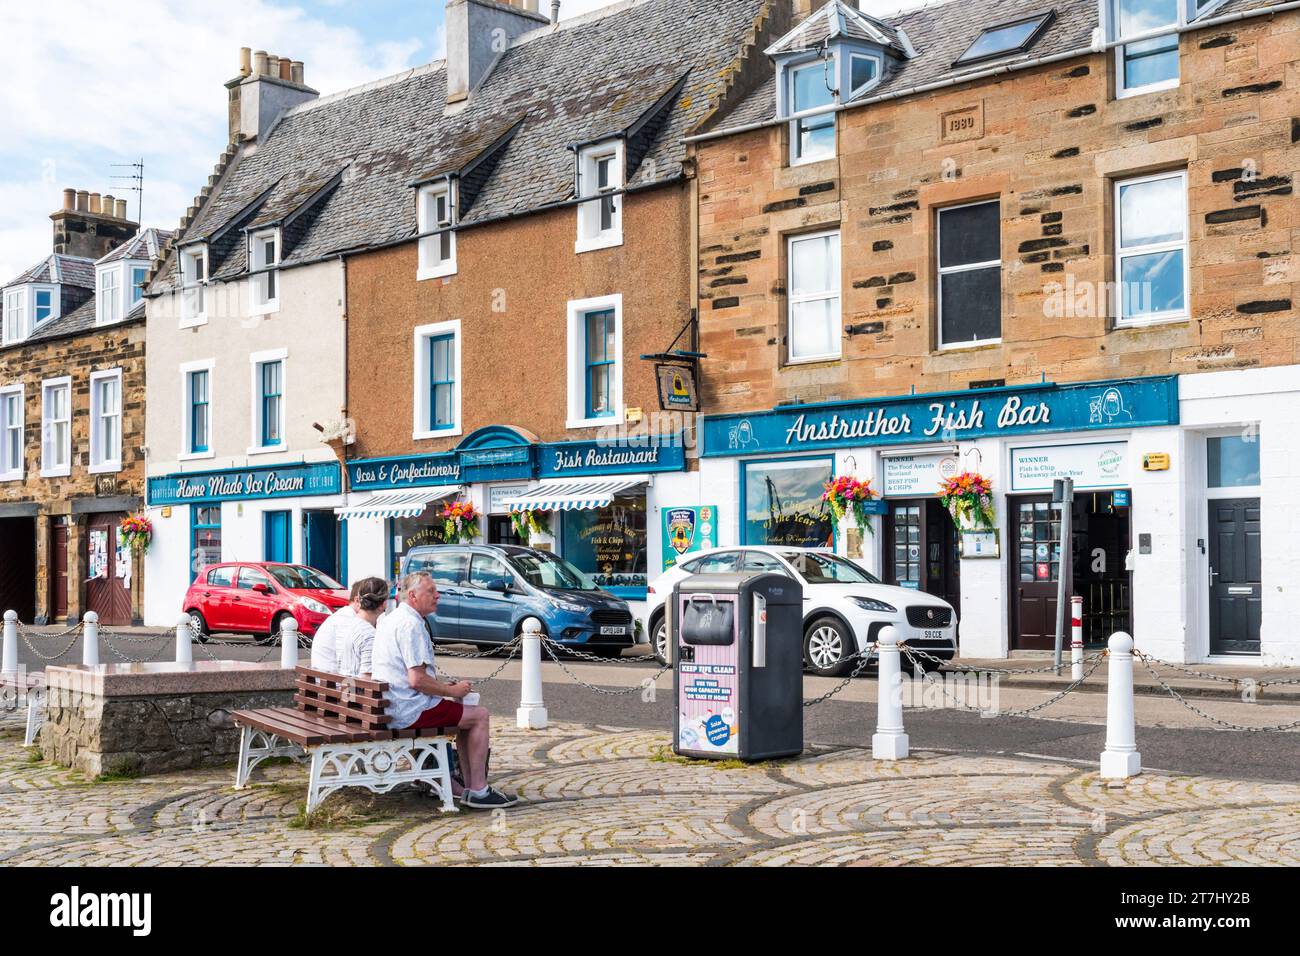 Anstruther Fish Bar a Shore Street, Anstruther, Fife. Foto Stock